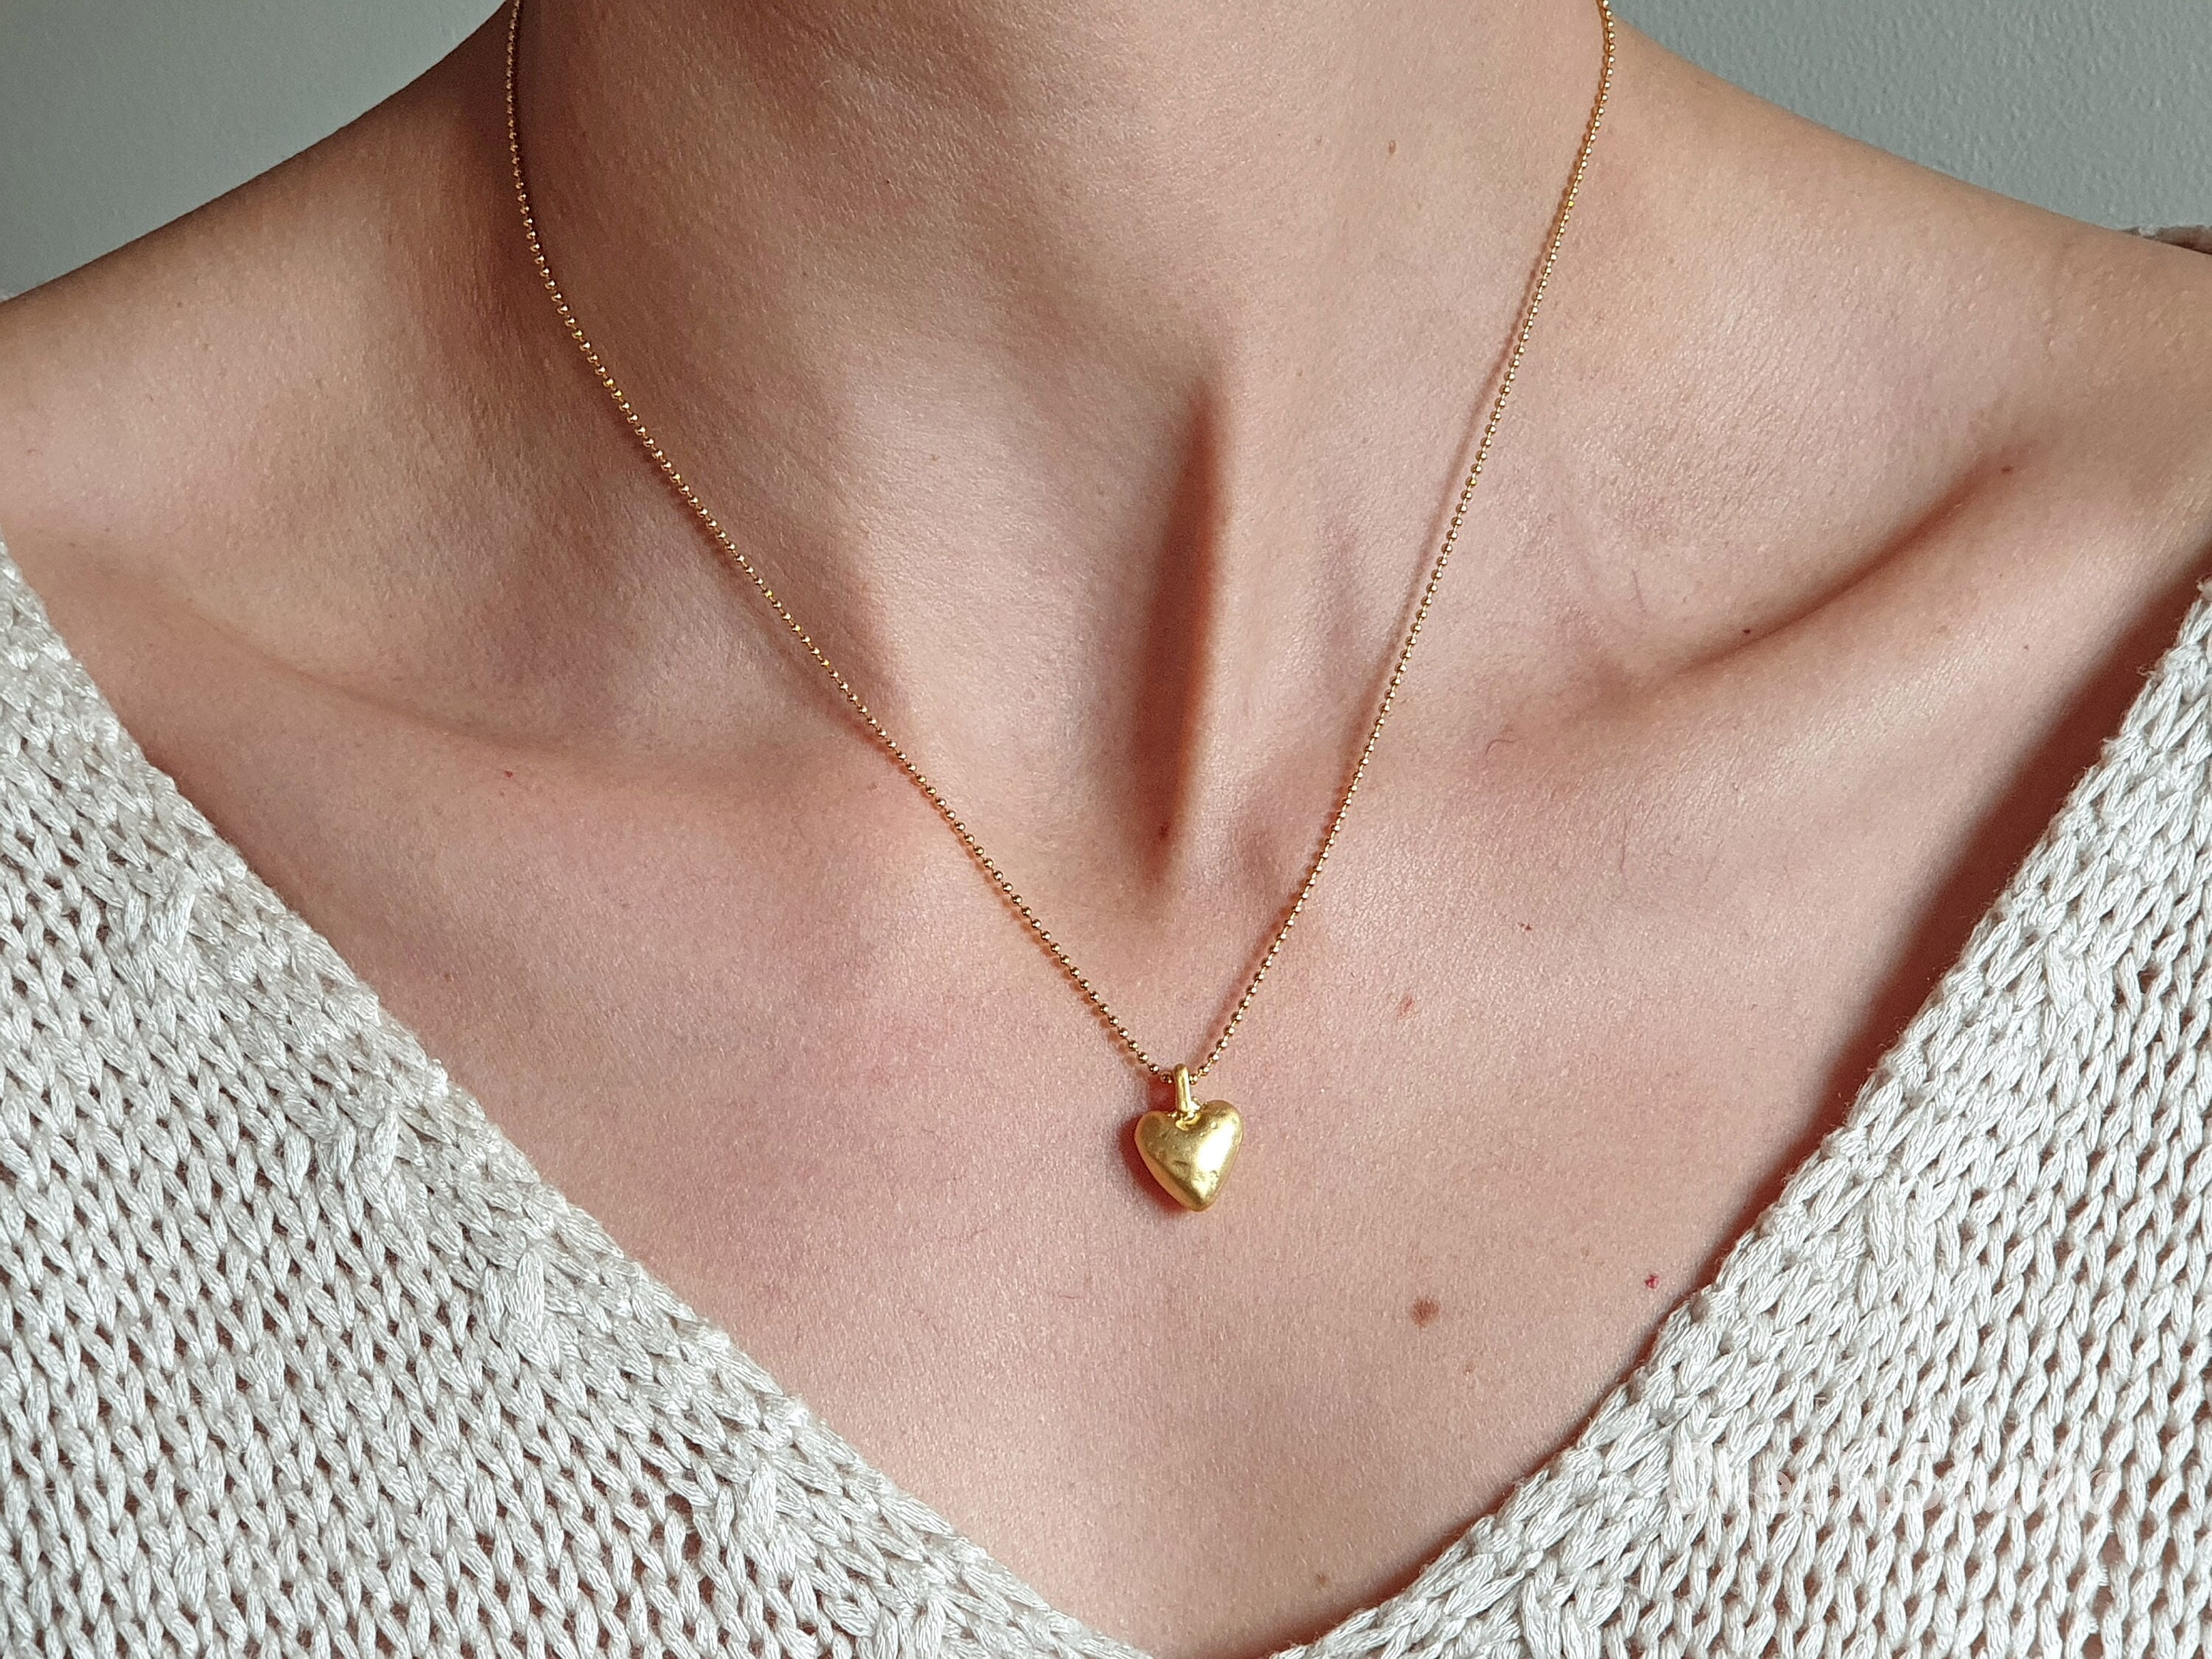 Awvialy Cute Heart Necklace Dainty Gold Heart Necklace 14K Gold Plated Minimalist Heart Necklace Small Love Heart Pendant Necklace Simple Gold